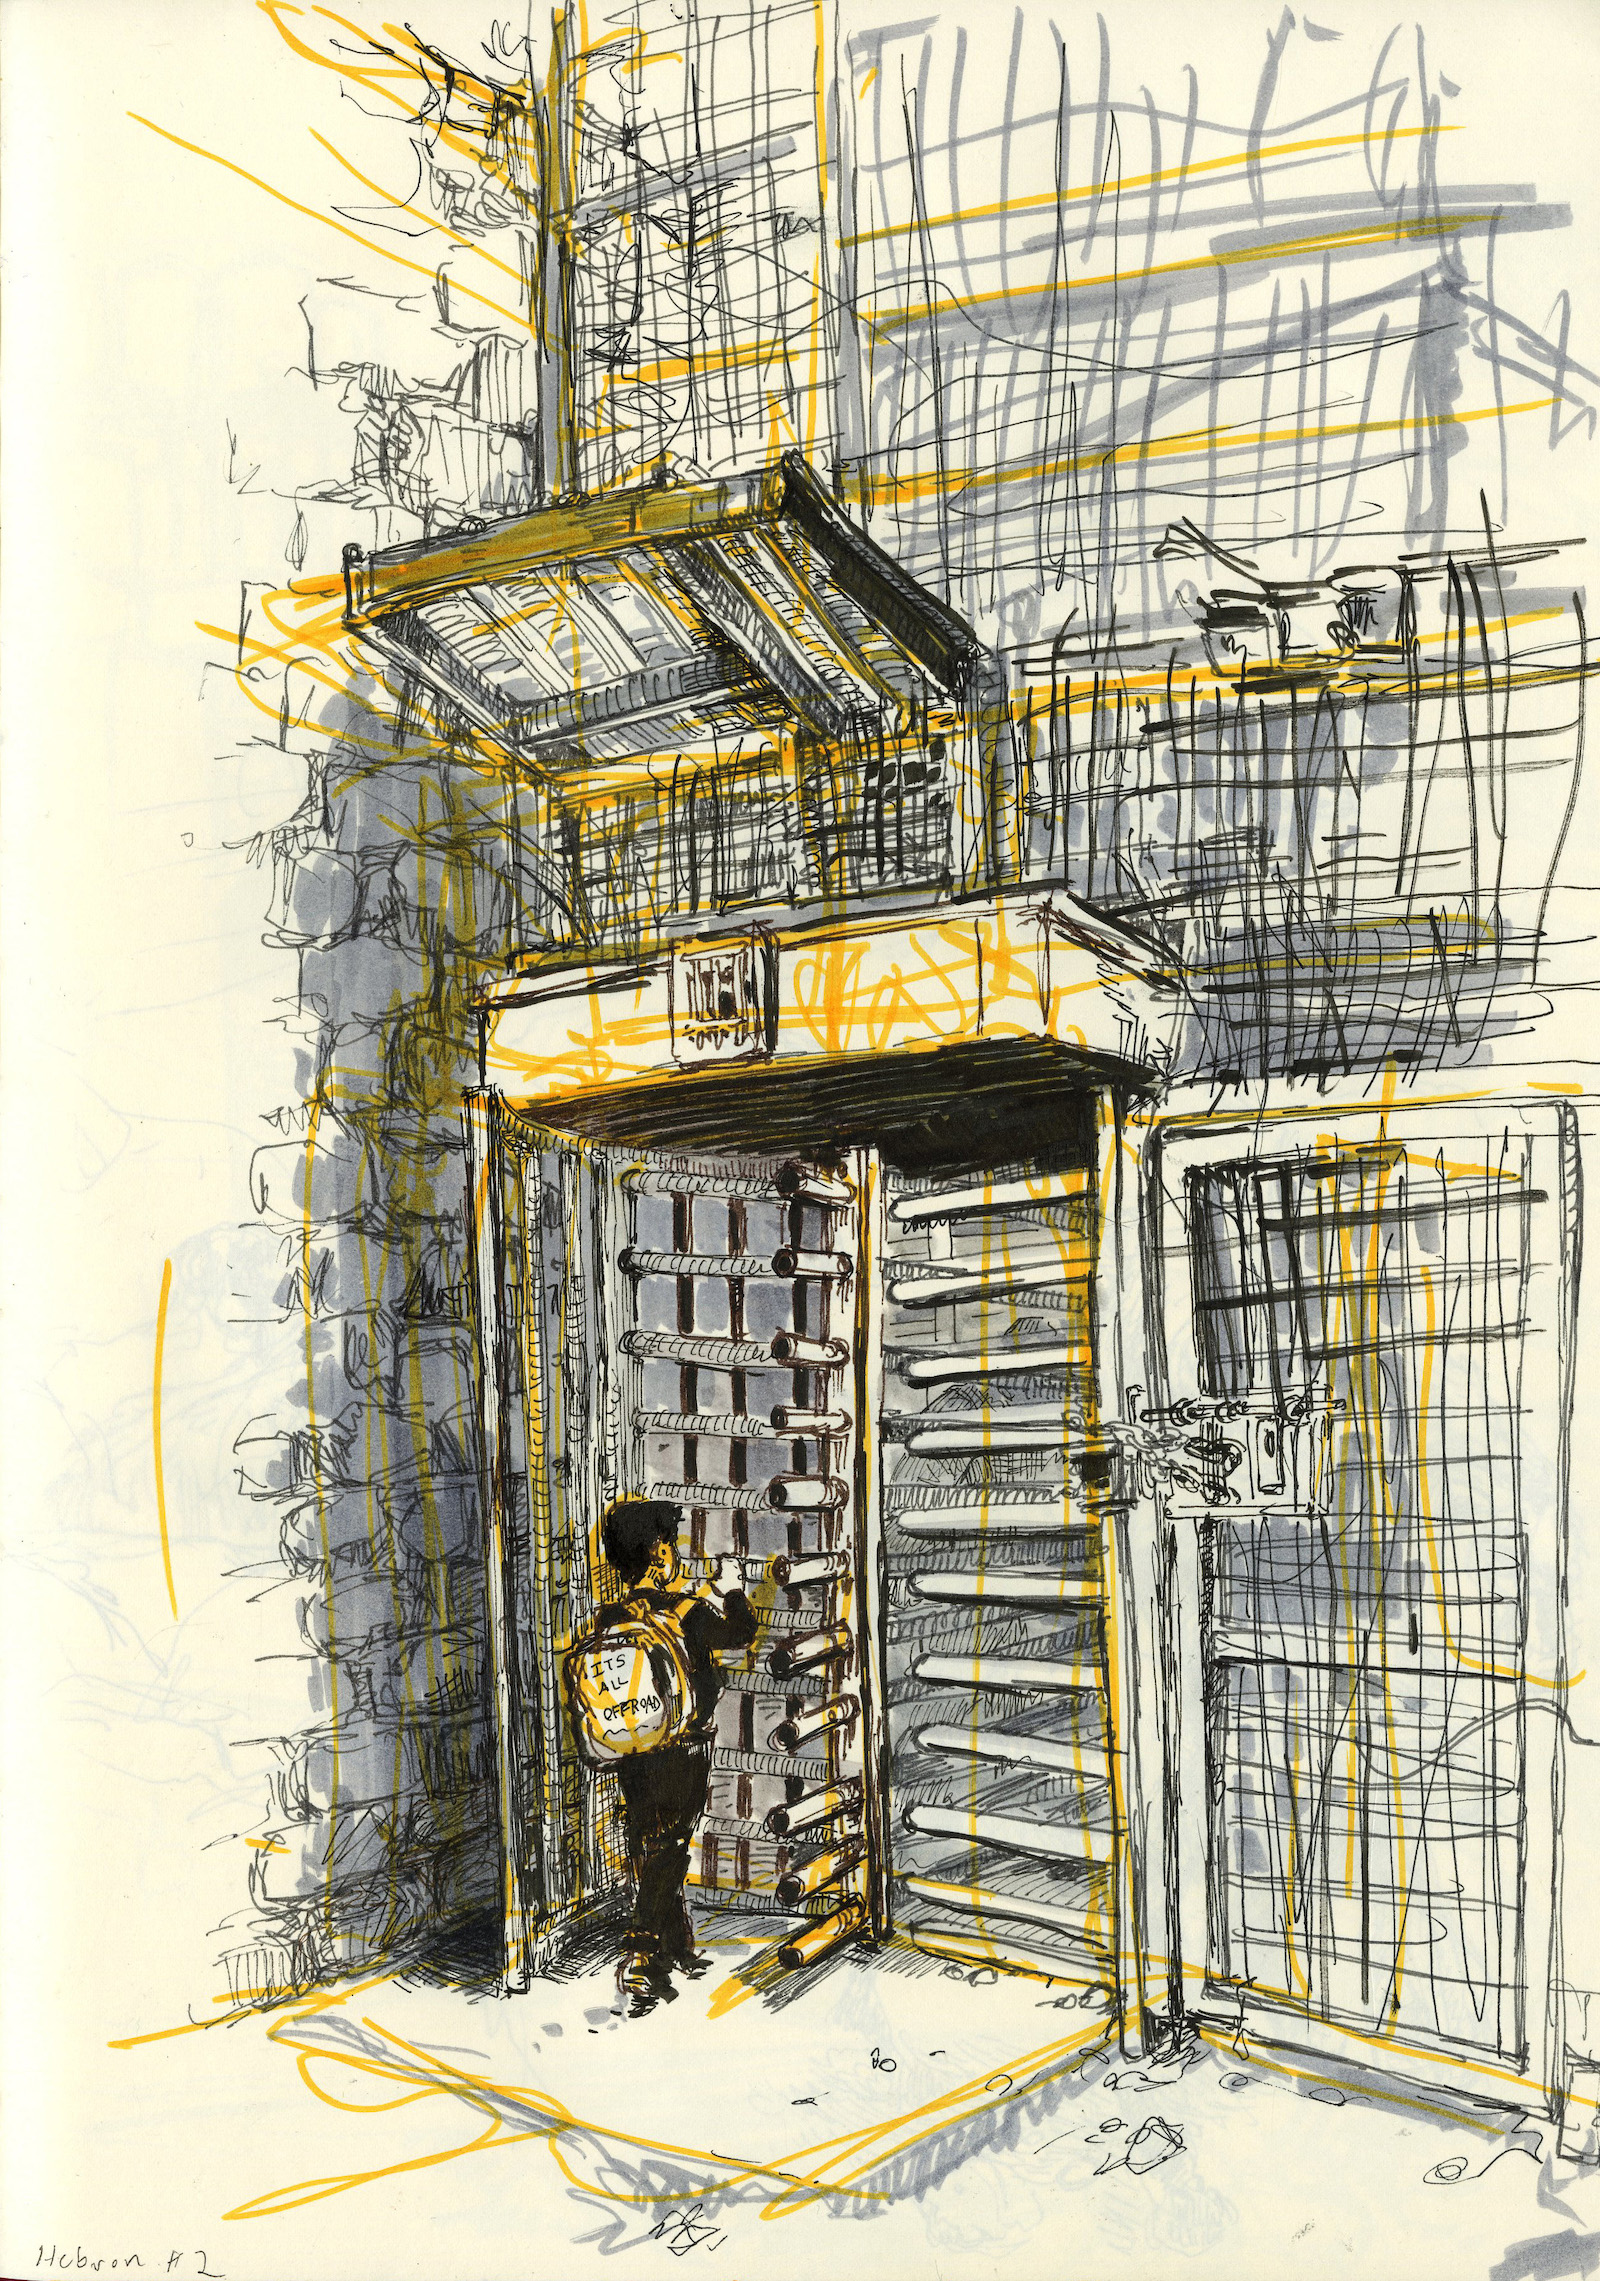 Drawing of a child with a backpack entering a turnstile equipped with security cameras